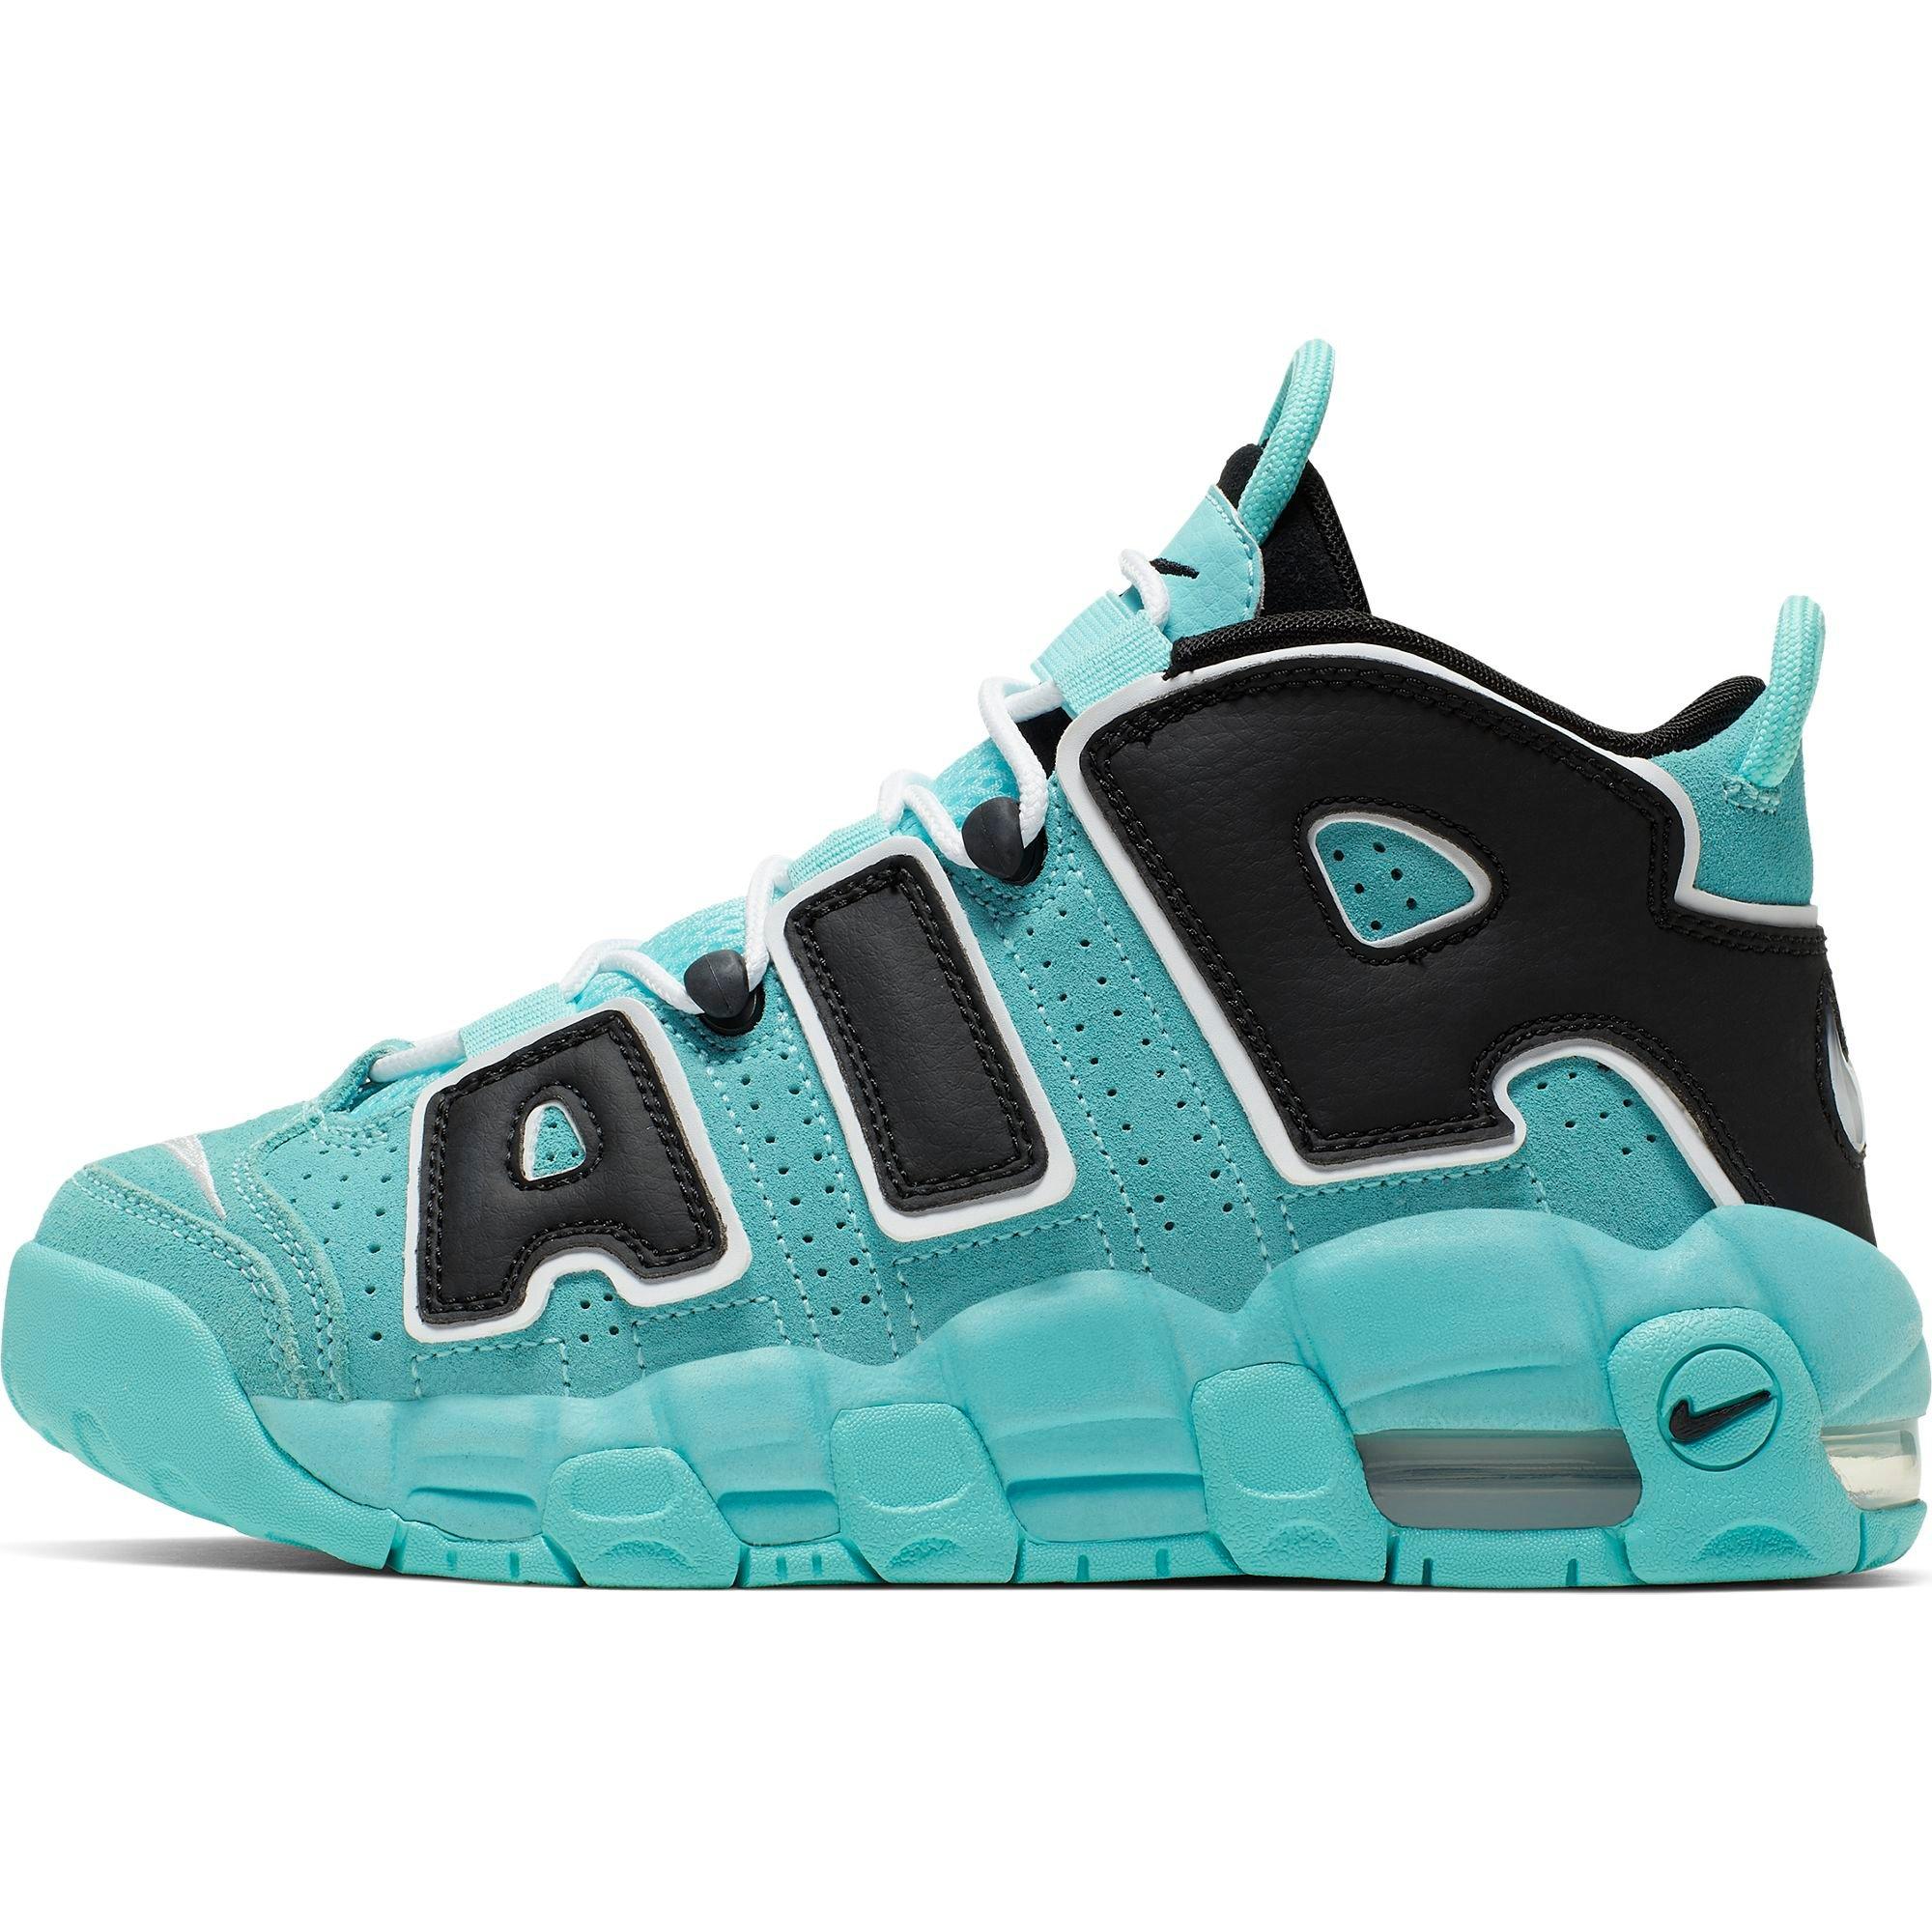 uptempo teal